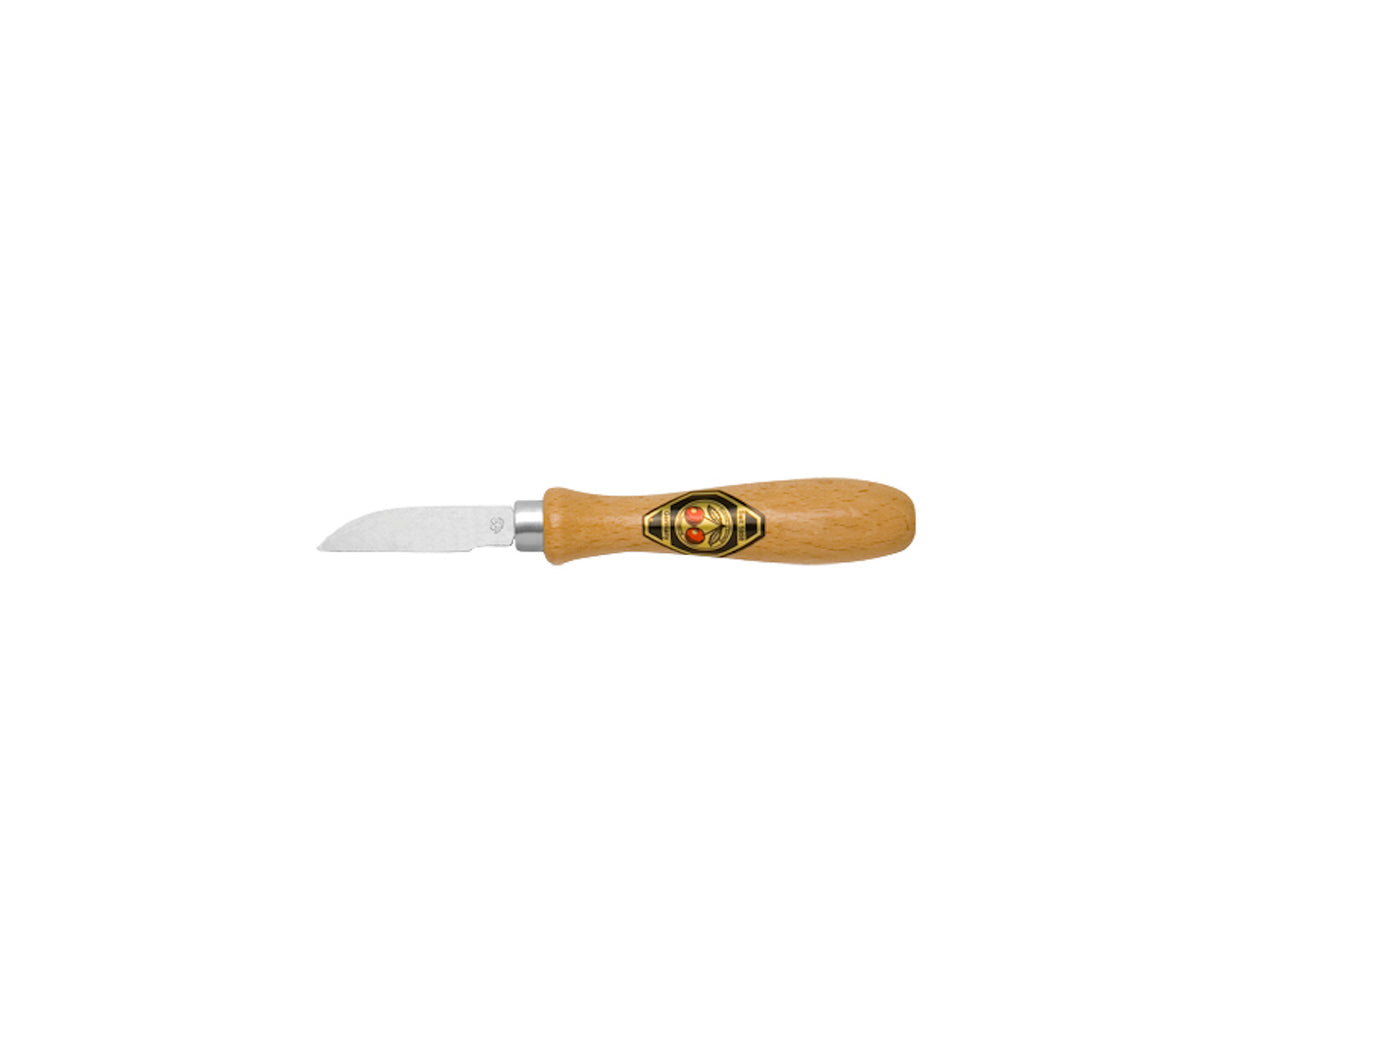 Two Cherries Chip Carving Knife 3362